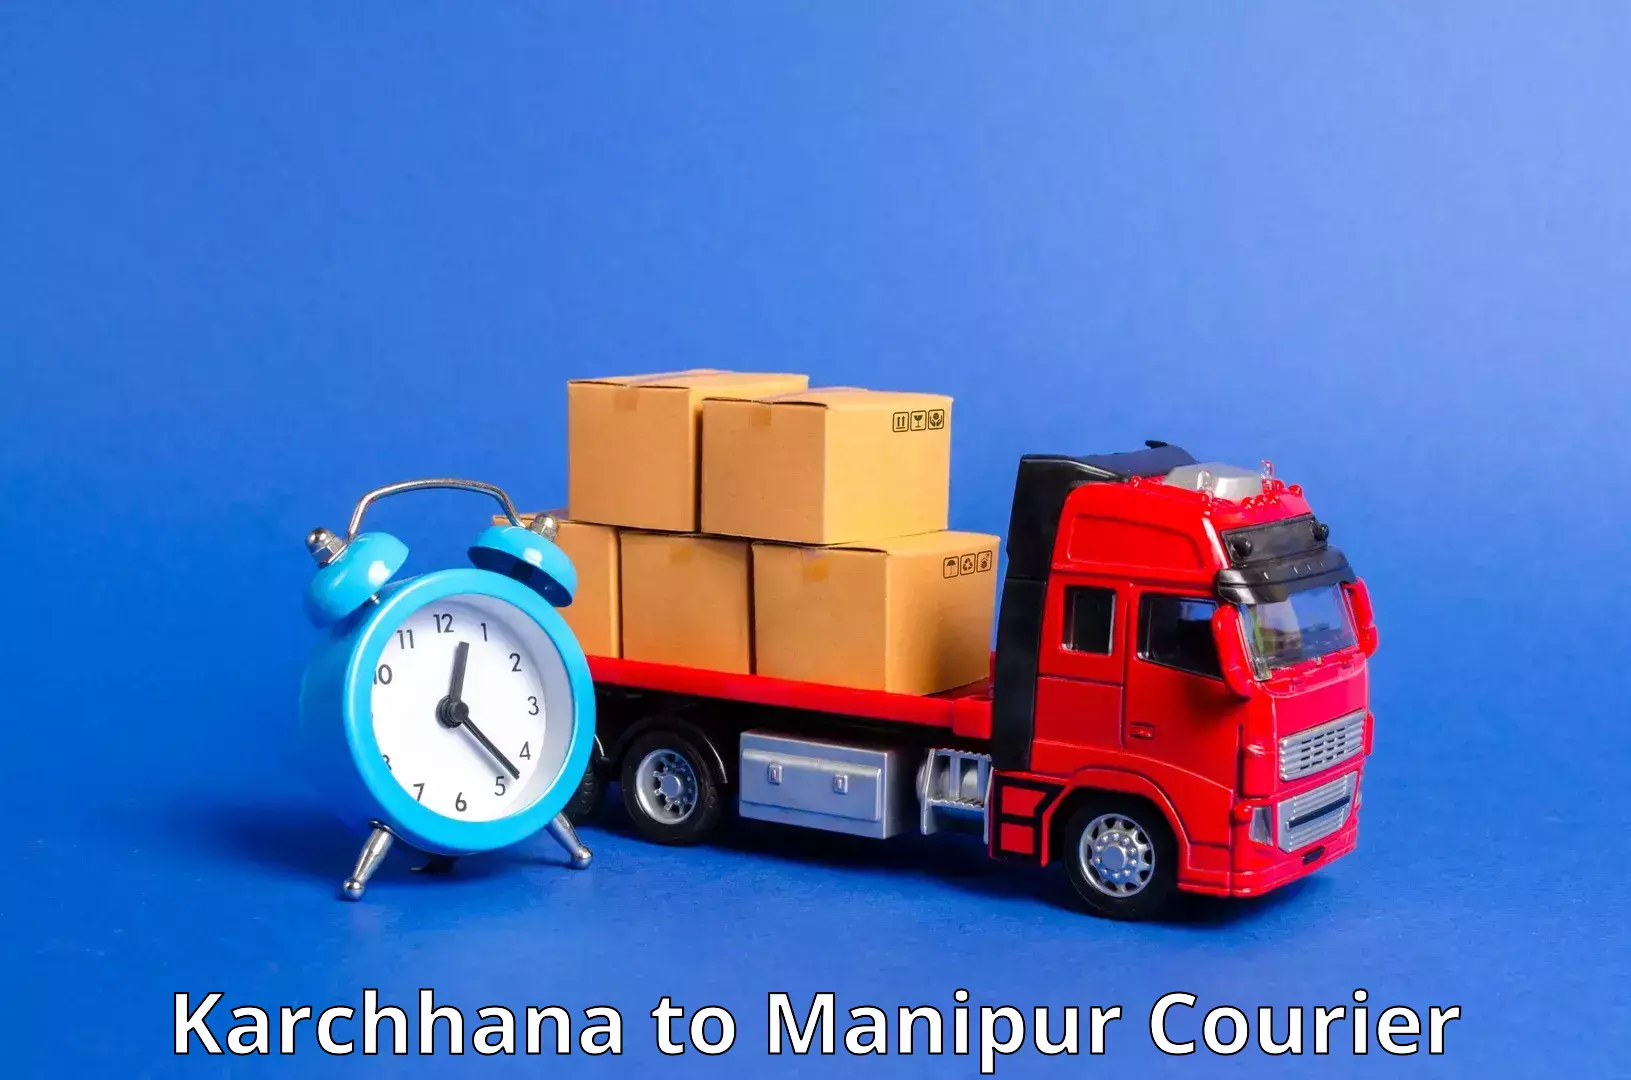 Courier service partnerships Karchhana to Manipur